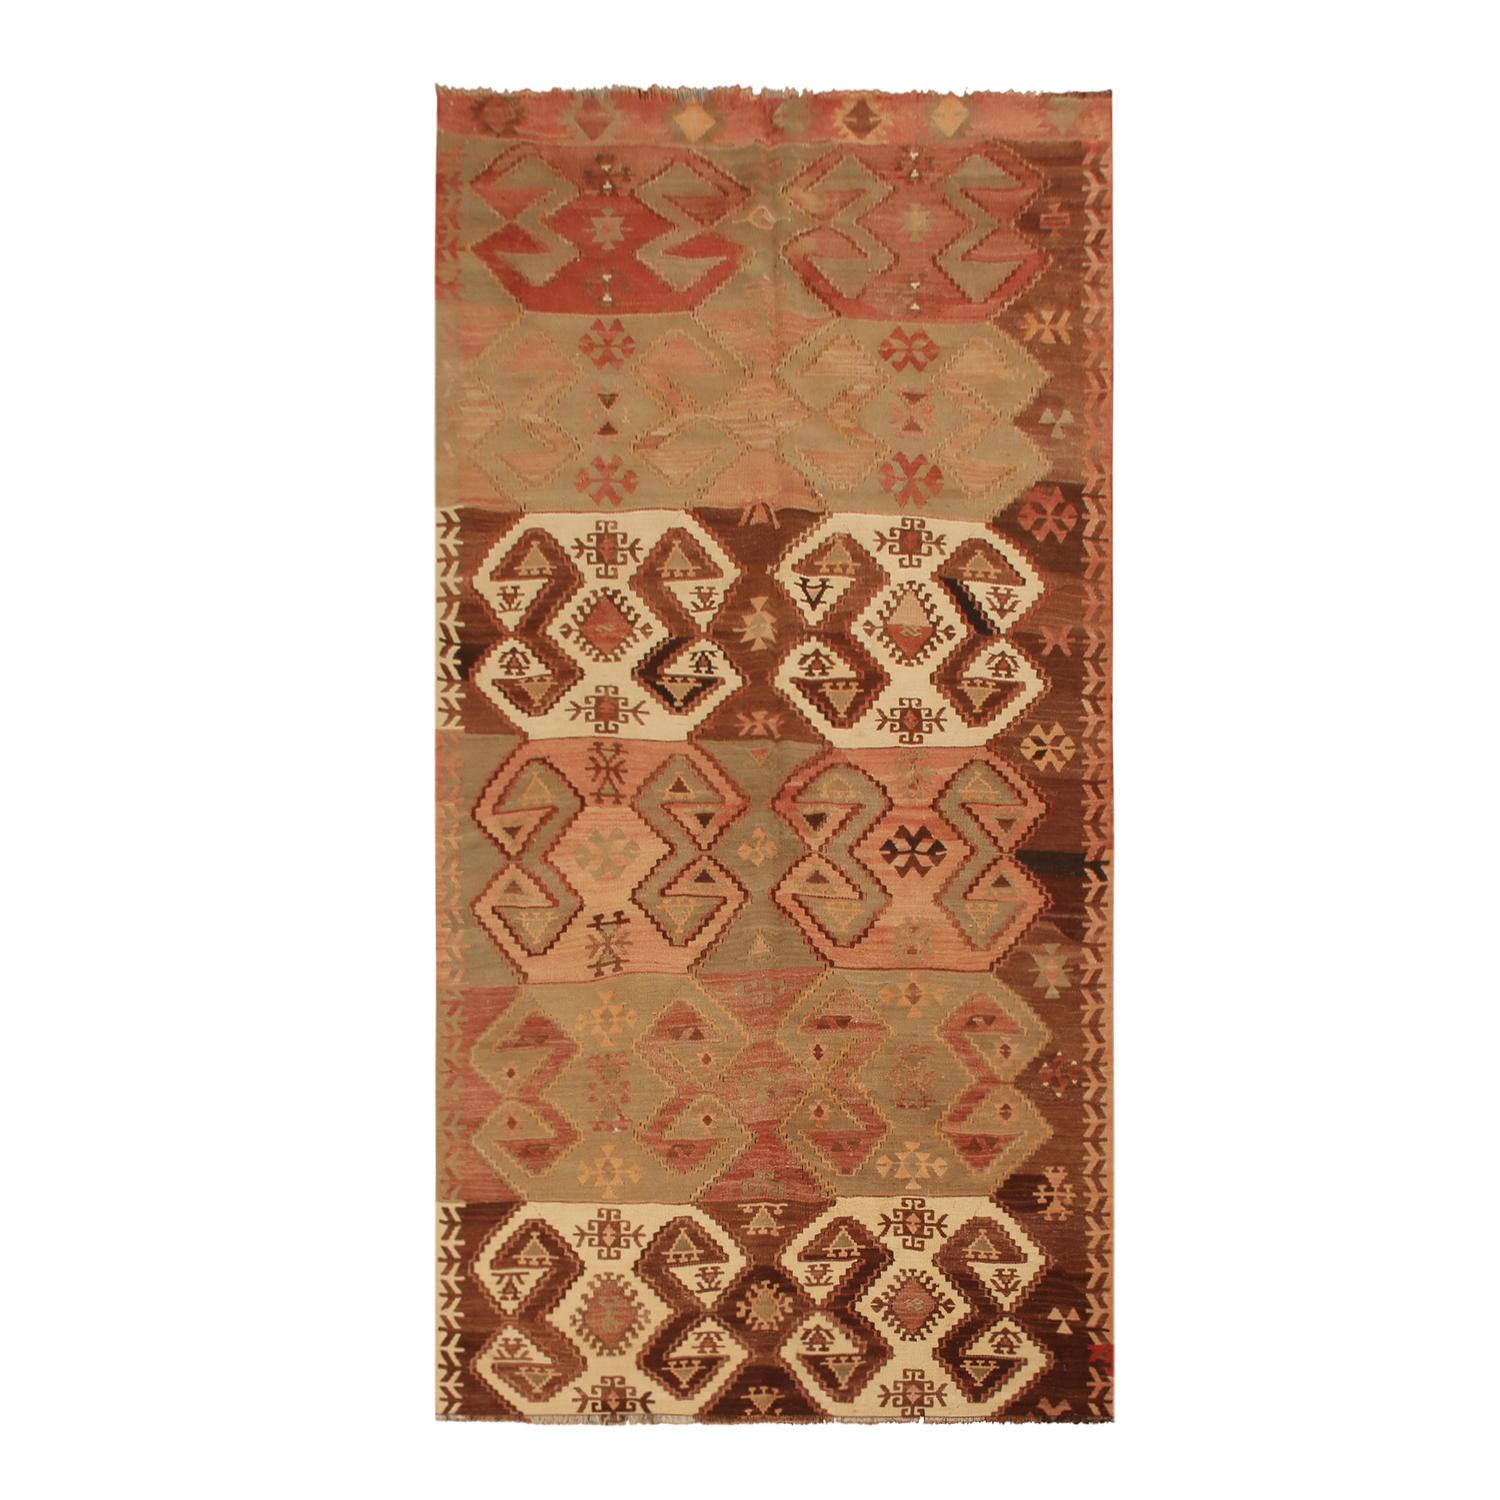 Flat-woven in high-quality wool originating from Turkey between 1940-1950, this vintage Esme Kilim rug enjoys an intriguing marriage of symmetry in pattern with a creative distribution of colorways, engaging the viewer with a very arresting